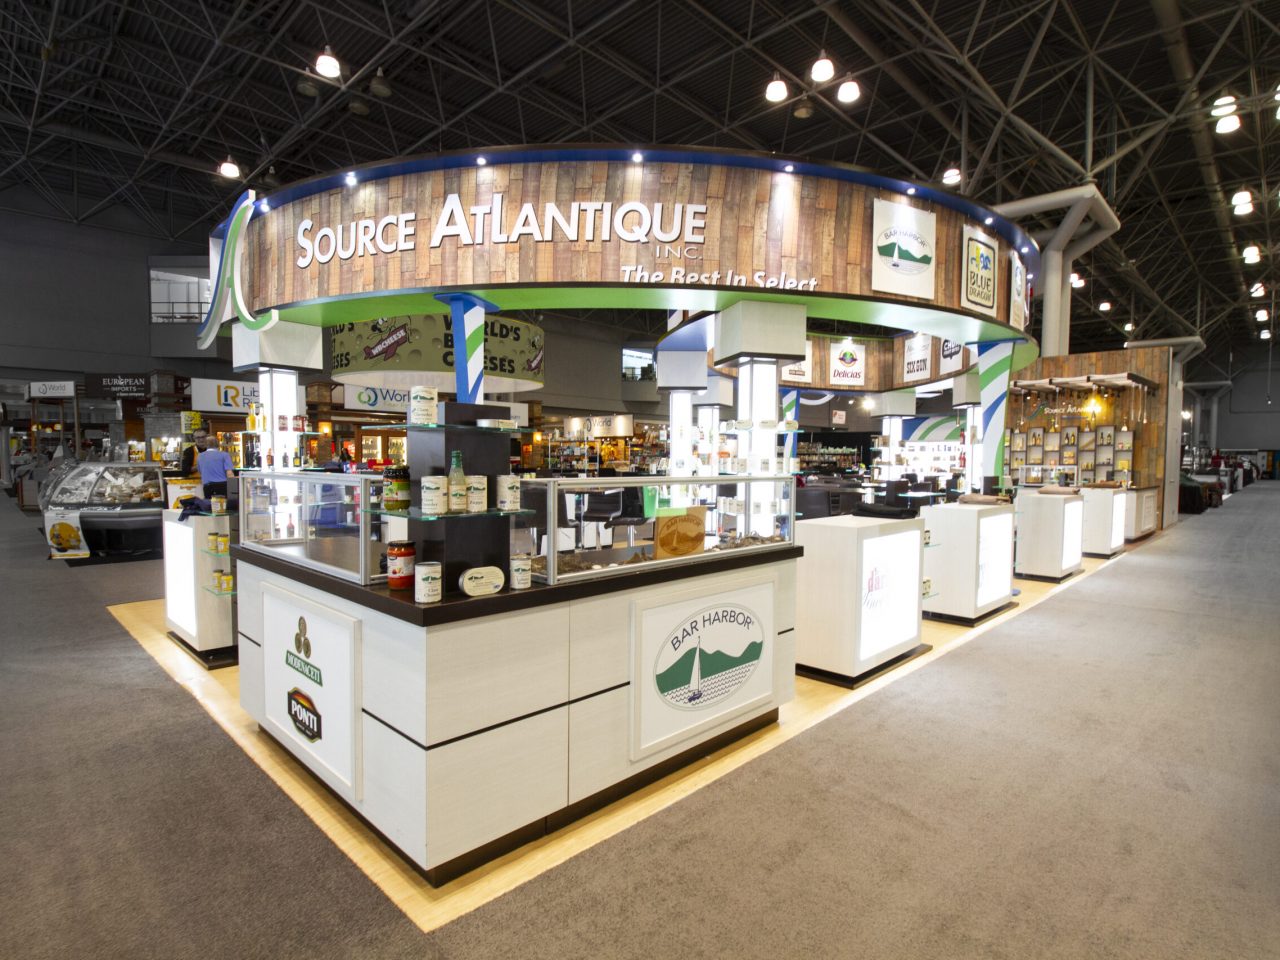 Right Wide View of the Source Atlantique Peninsula Exhibit at Summer Fancy Food Show.